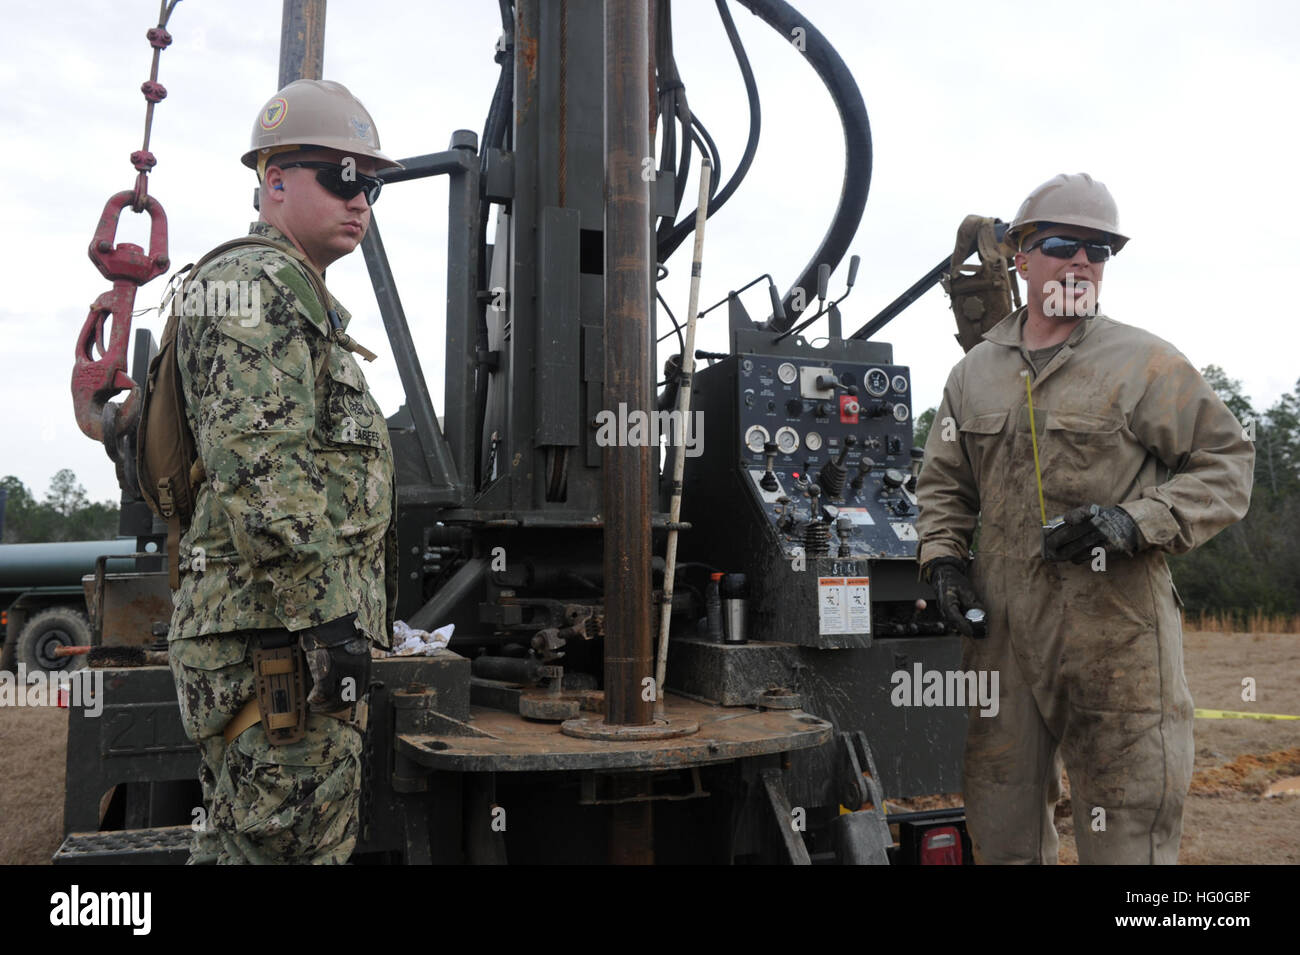 U.S. Navy Steelworker 3rd Class Kristopher Poehl, left, and Construction Electrician 2nd Class Joel Shriver, both assigned to Naval Mobile Construction Battalion (NMCB) 15, operate a water well during pre-deployment training Jan. 8, 2013, at Camp Shelby, Miss. NMCB-15 was preparing to deploy to Afghanistan in support of Operation Enduring Freedom. (U.S. Navy photo by Mass Communication Specialist 2nd Class Daniel Garas/Released) Well operation 130108-N-OV434-011 Stock Photo